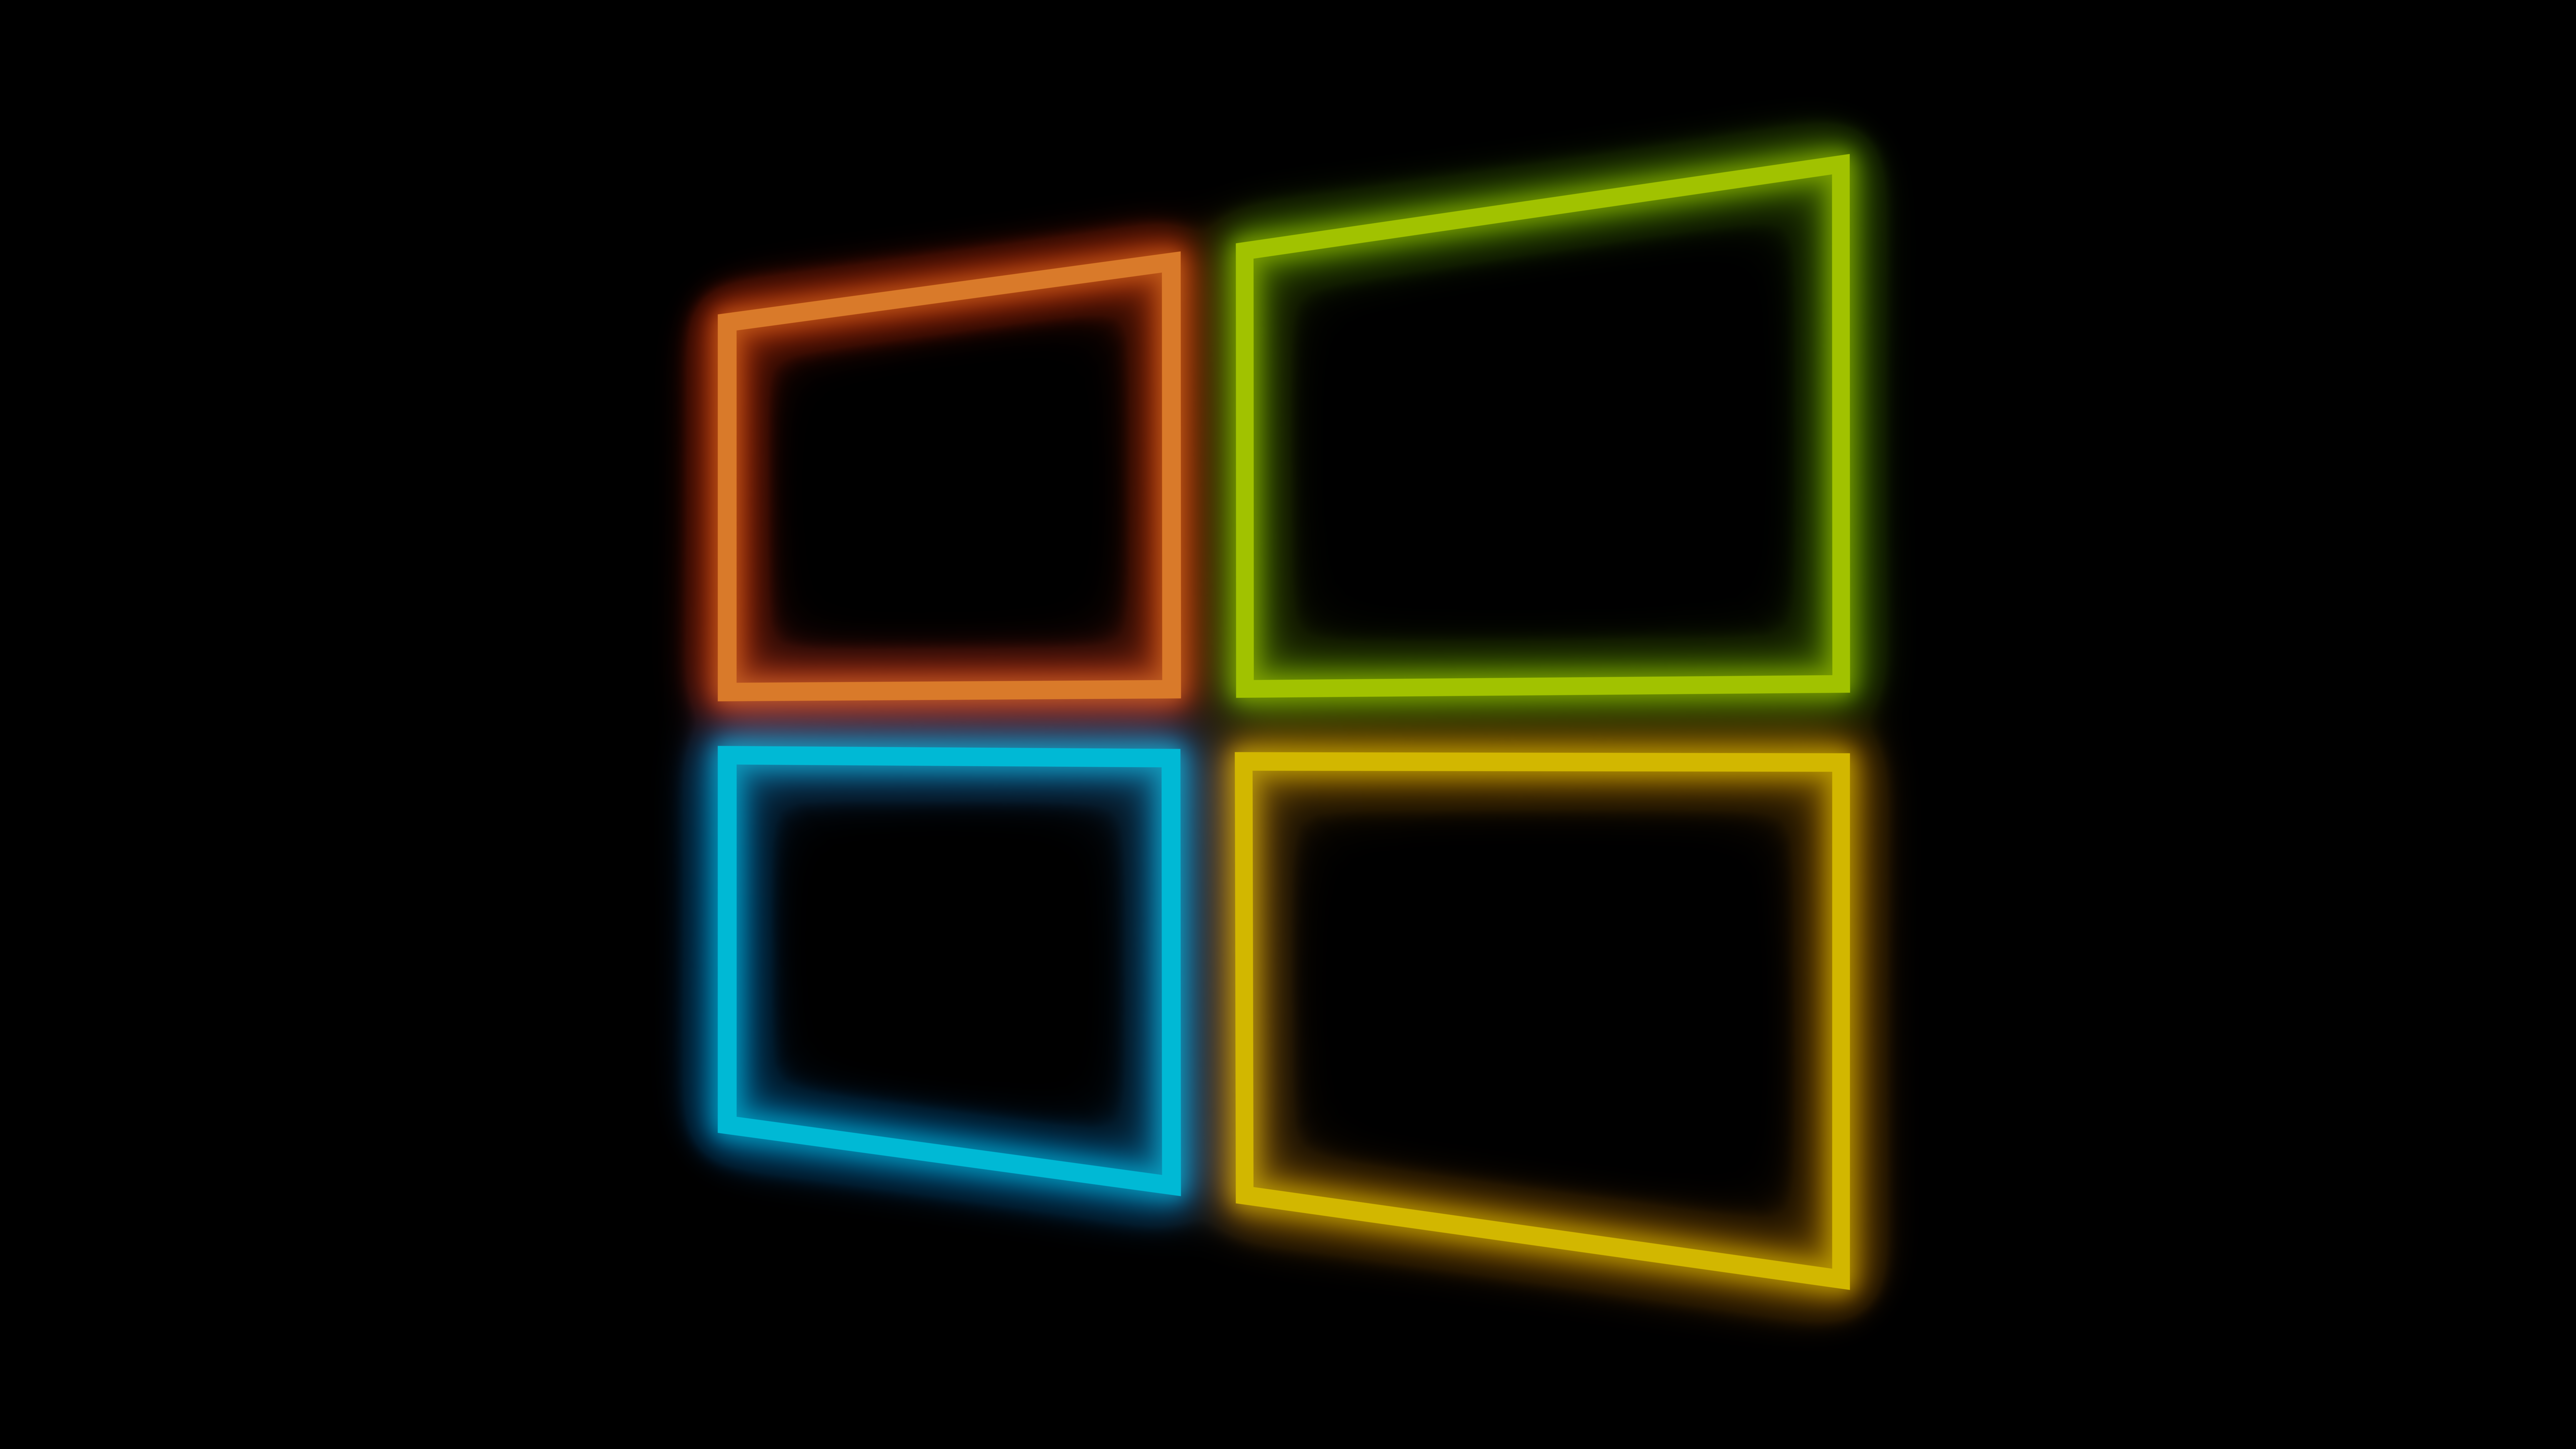 Windows 4k Wallpapers For Your Desktop Or Mobile Screen Free And Easy To Download